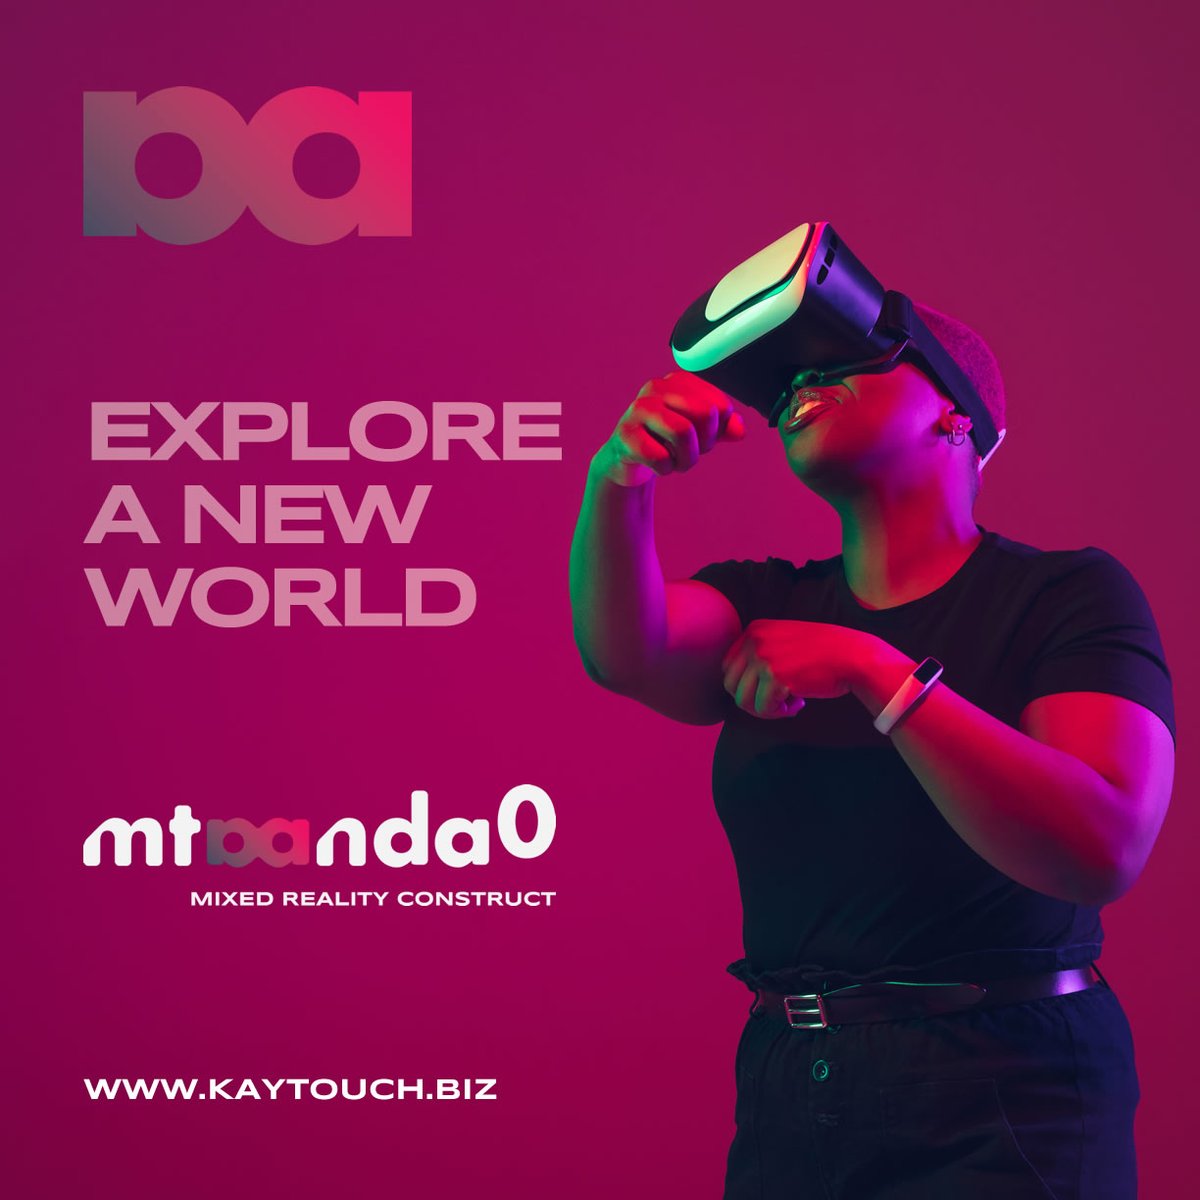 When well designed, the metaverse  combines VR with data science and spatial design to improve learner engagement, confidence, and application. #Metaverse #datamodelling